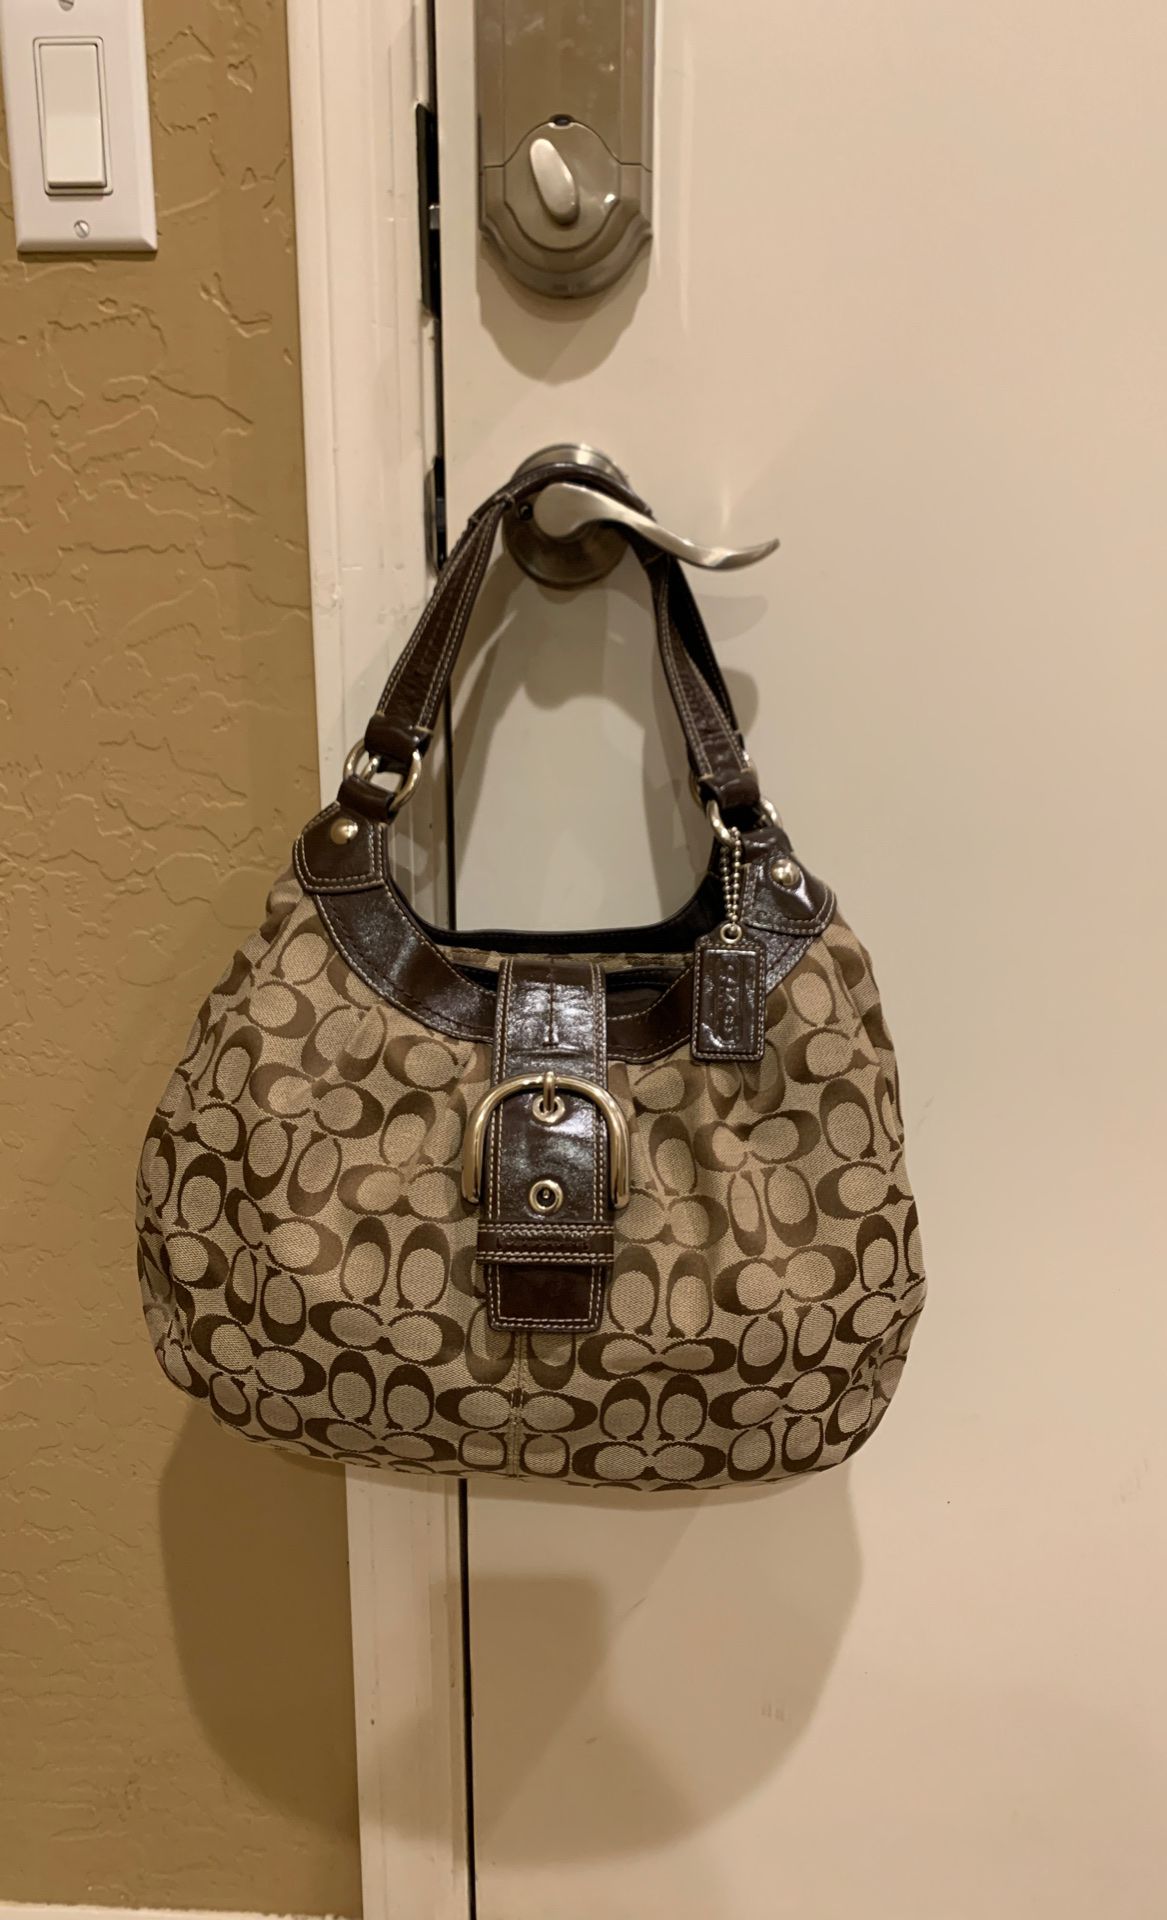 Coach purse and wallet